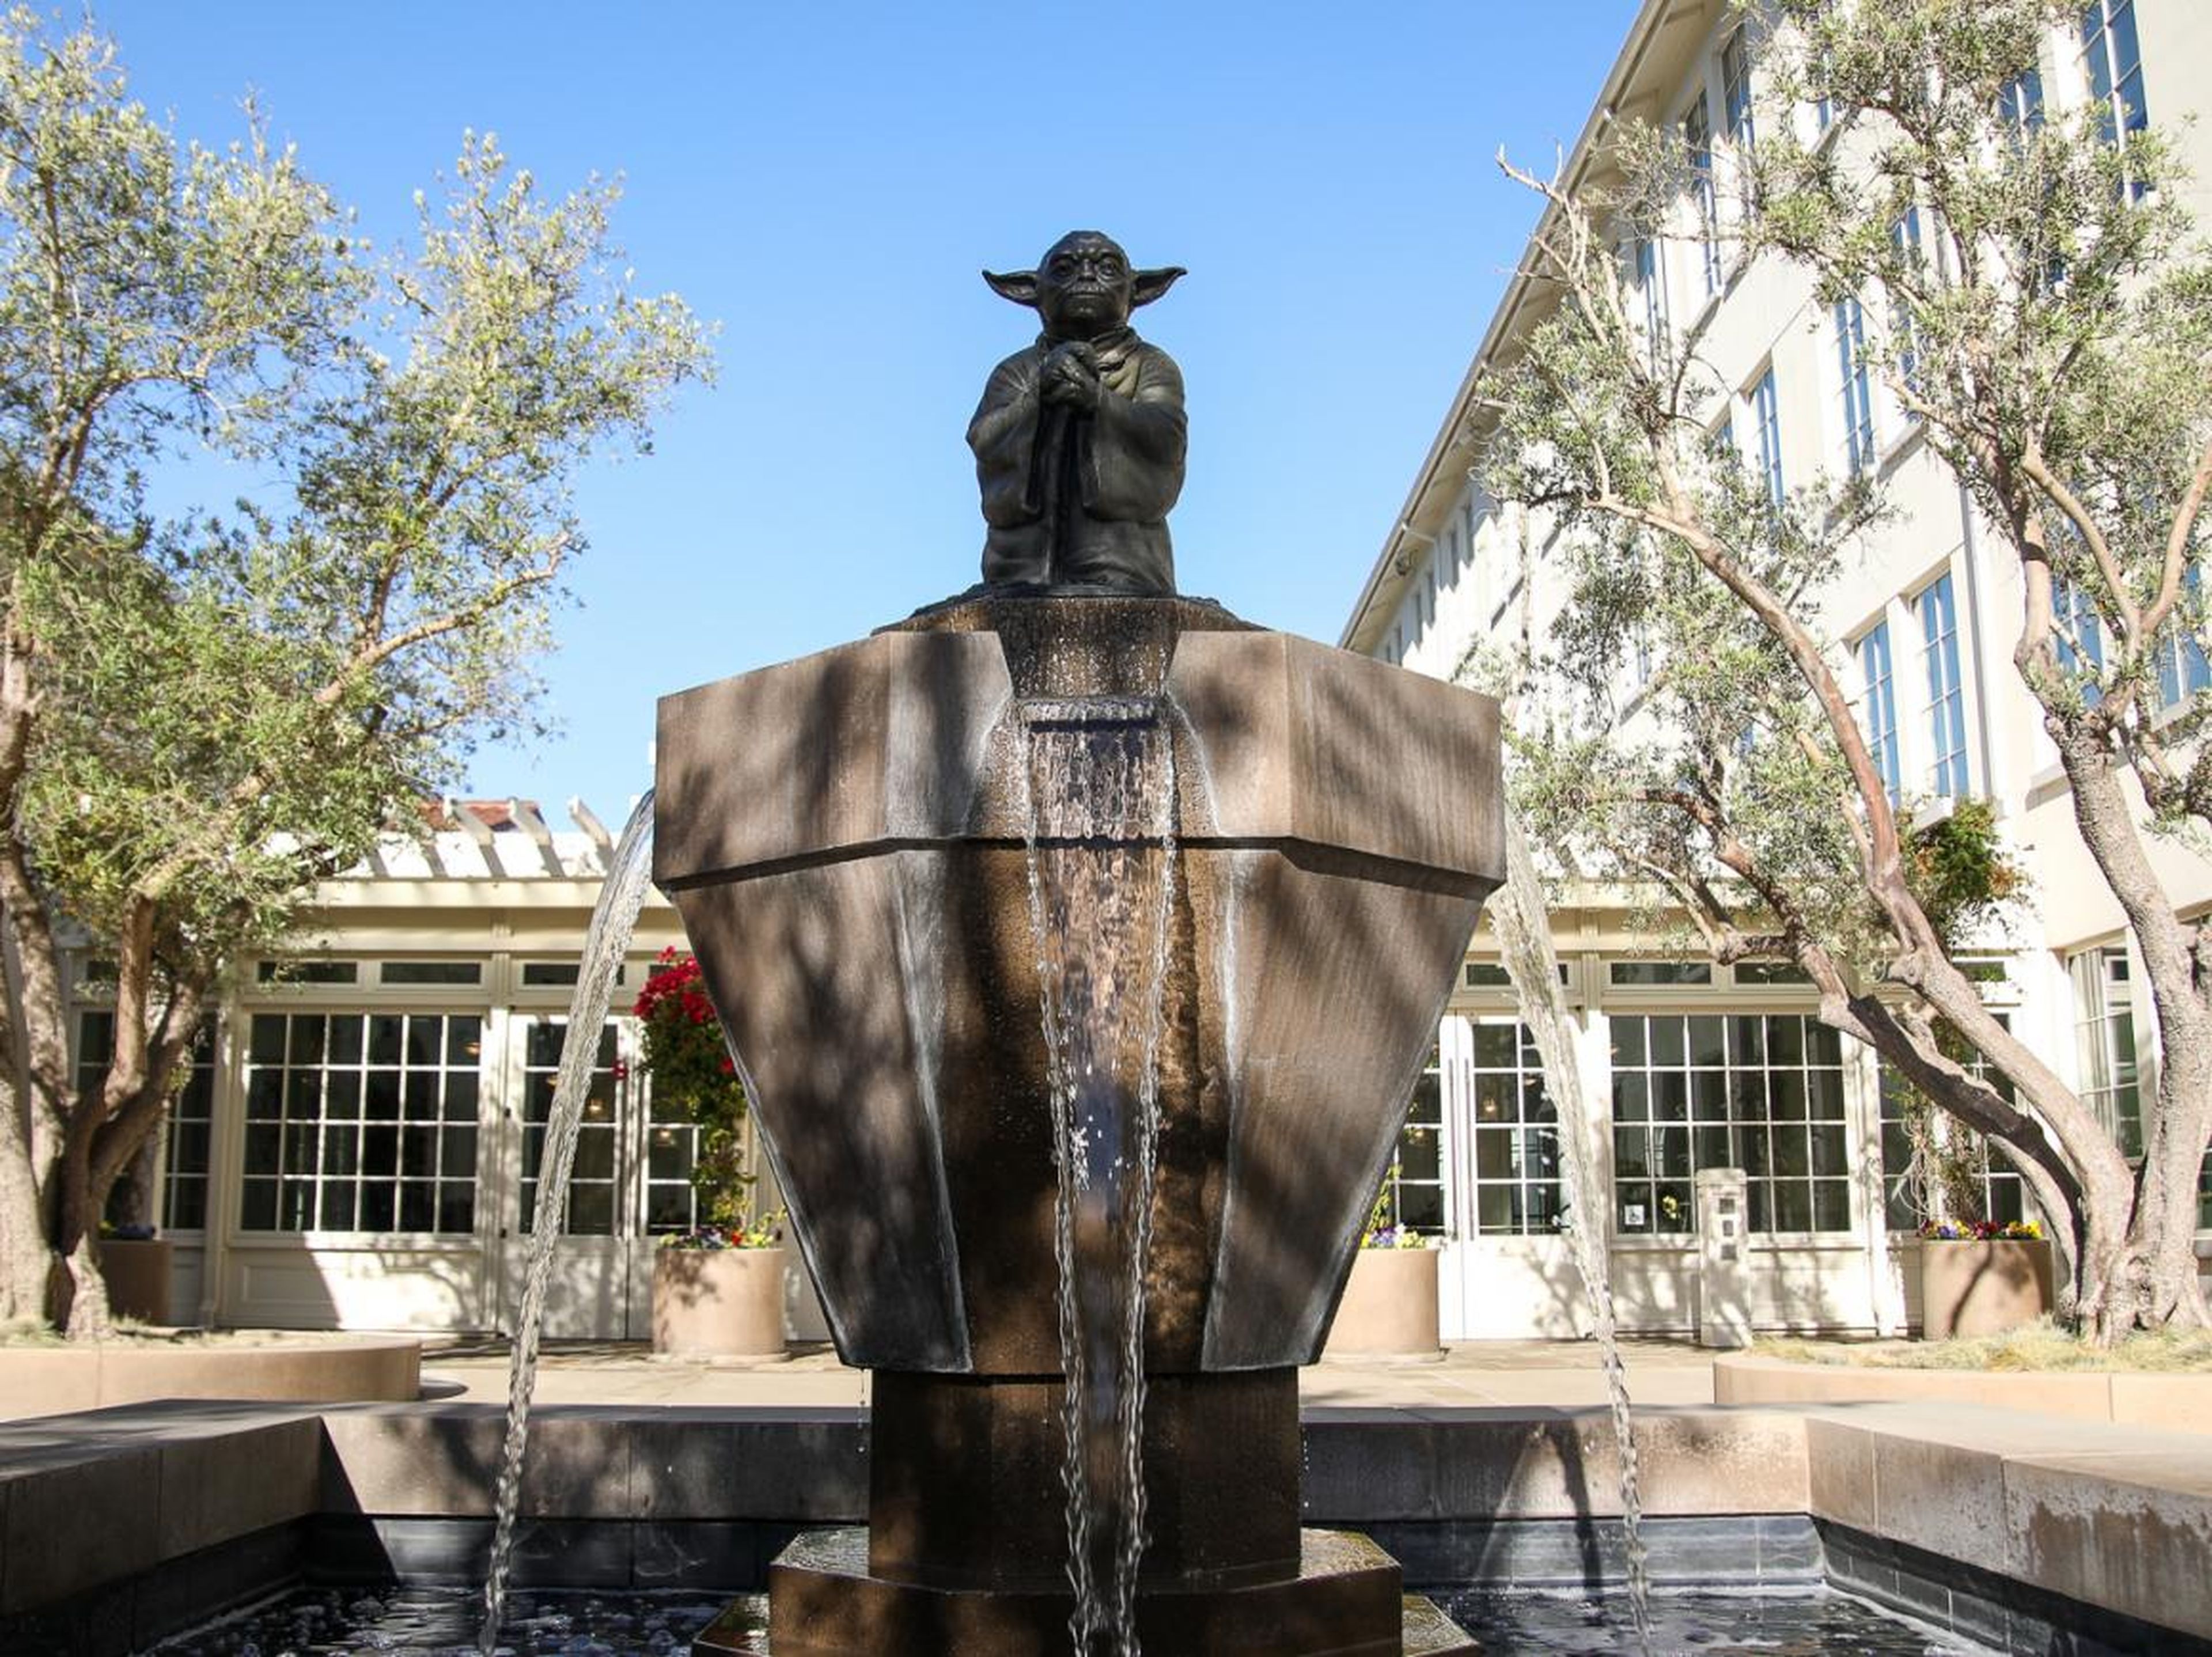 The creator of "Star Wars" entered the San Francisco ecosystem in 2005. You can visit the Yoda Fountain outside the company's offices.